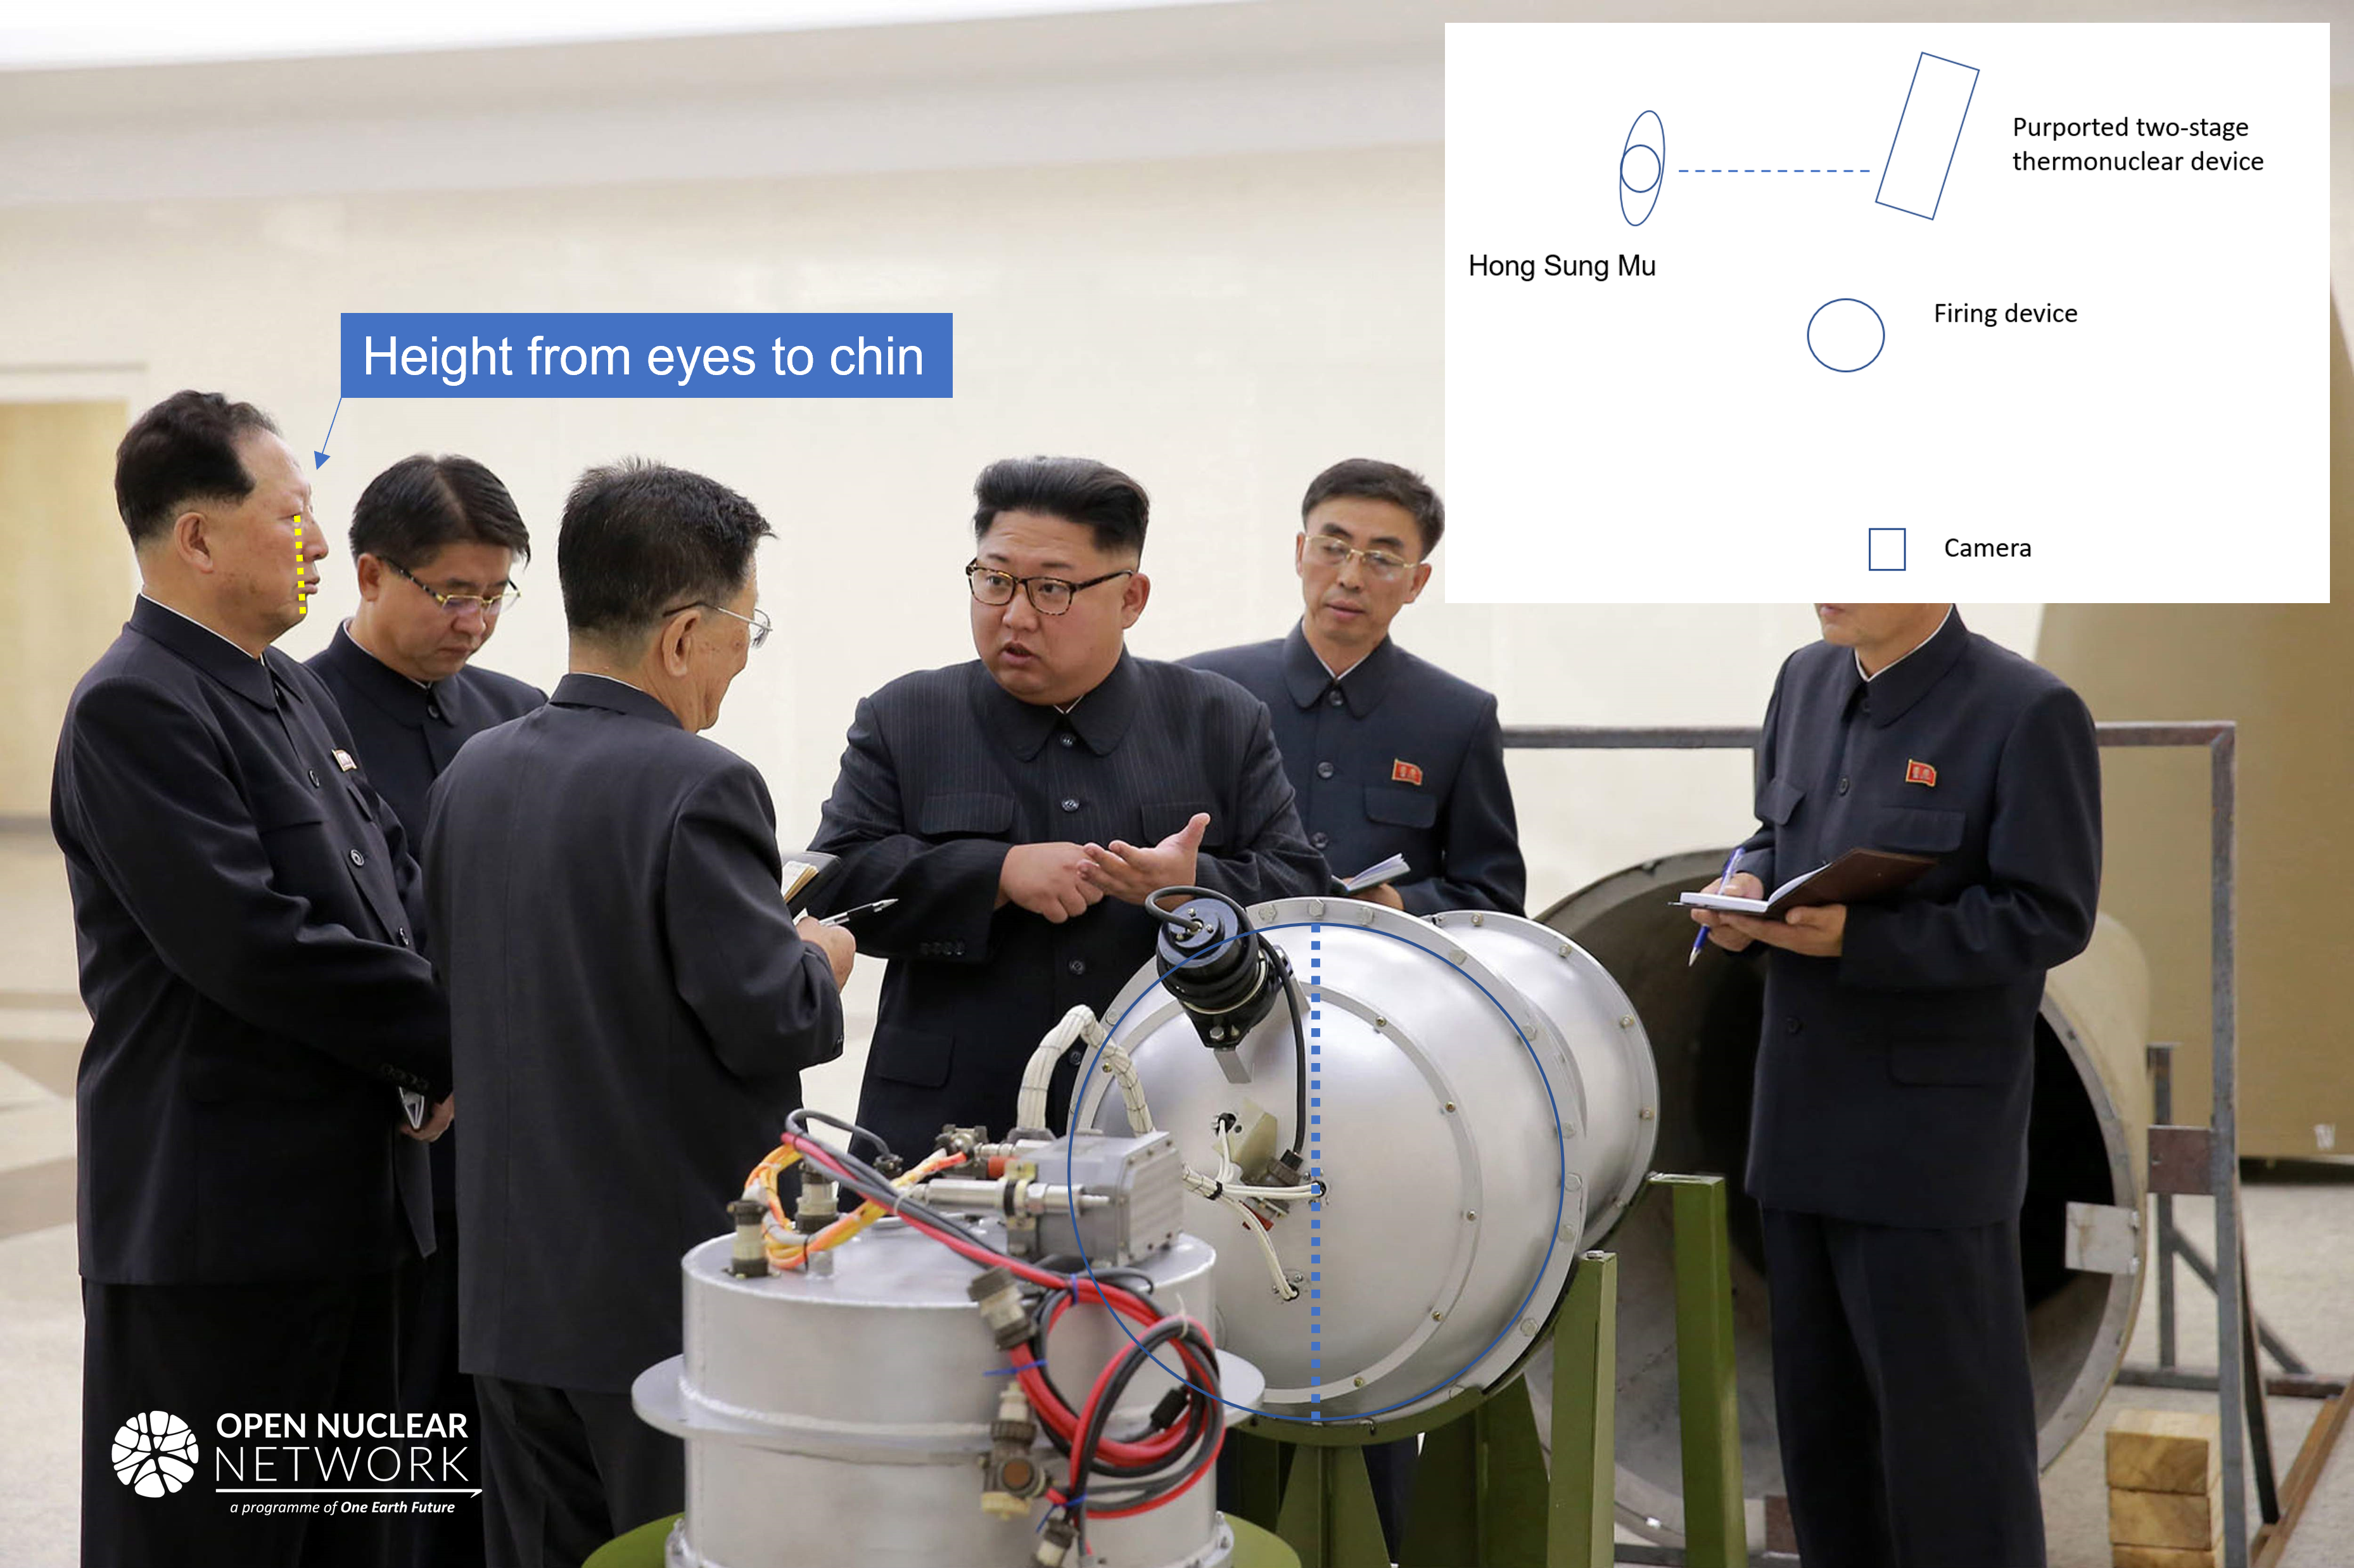 Figure 11. Measuring diameter of primary of purported thermonuclear device with face length of Hong Sung Mu as a reference. Inset shows approximate spatial relationship of the photo setting. Image: KCNA/CNN